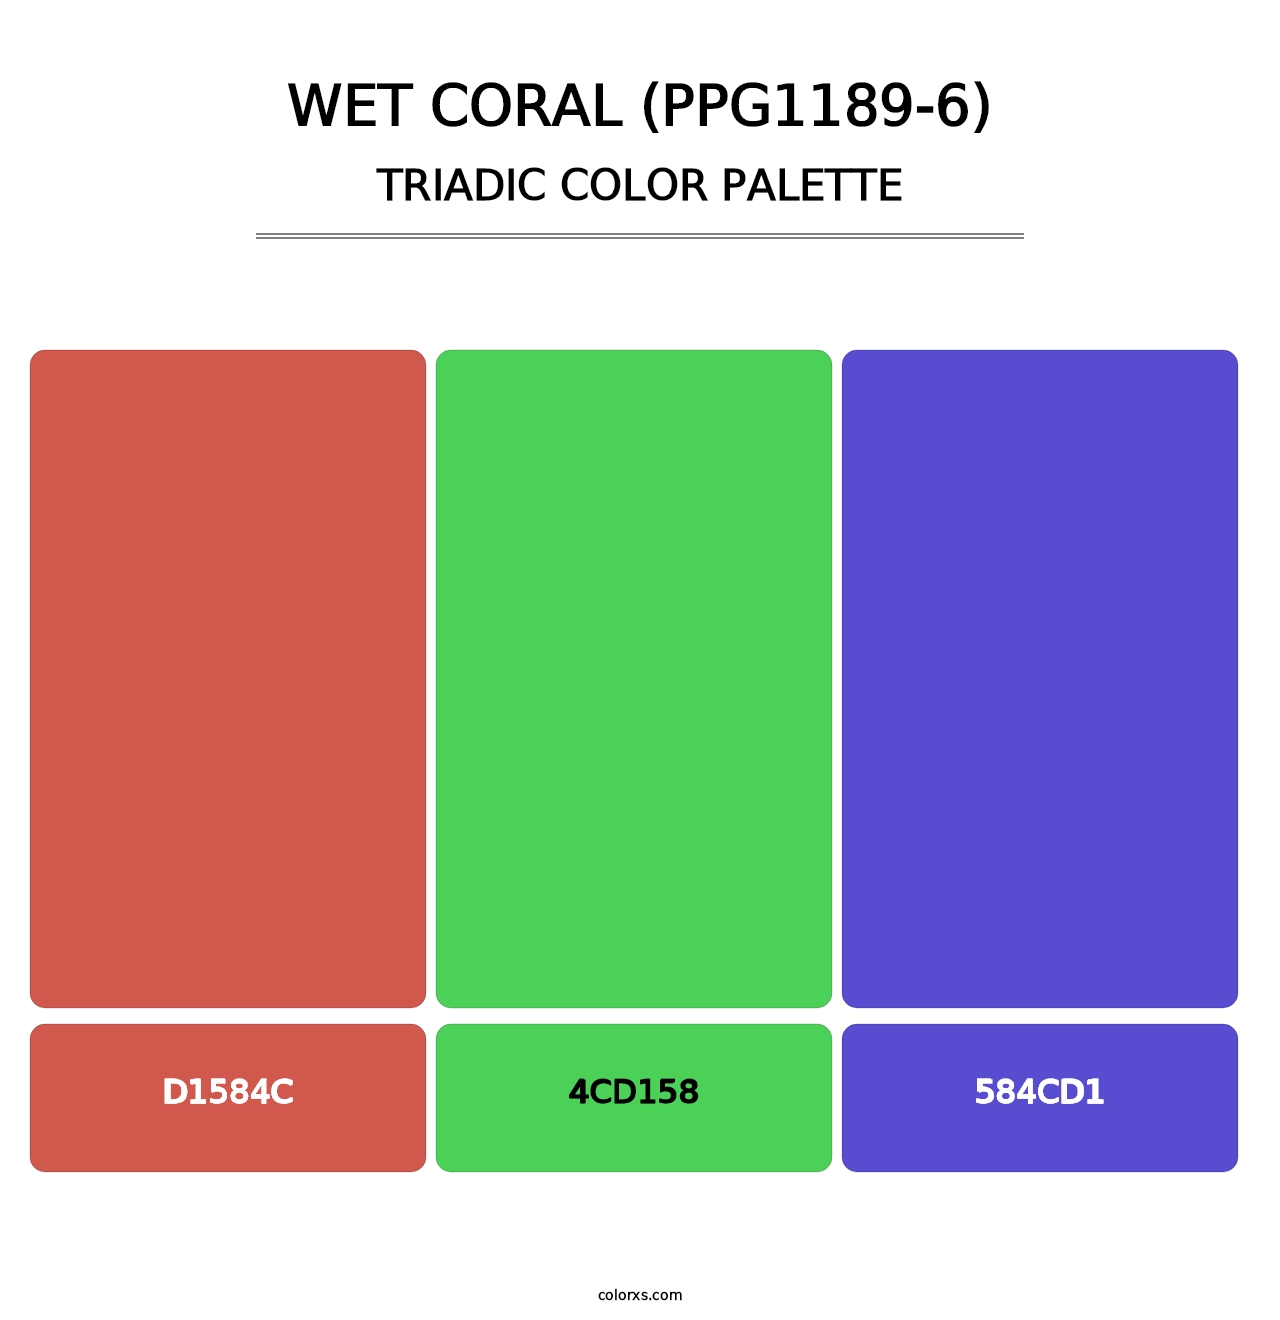 Wet Coral (PPG1189-6) - Triadic Color Palette